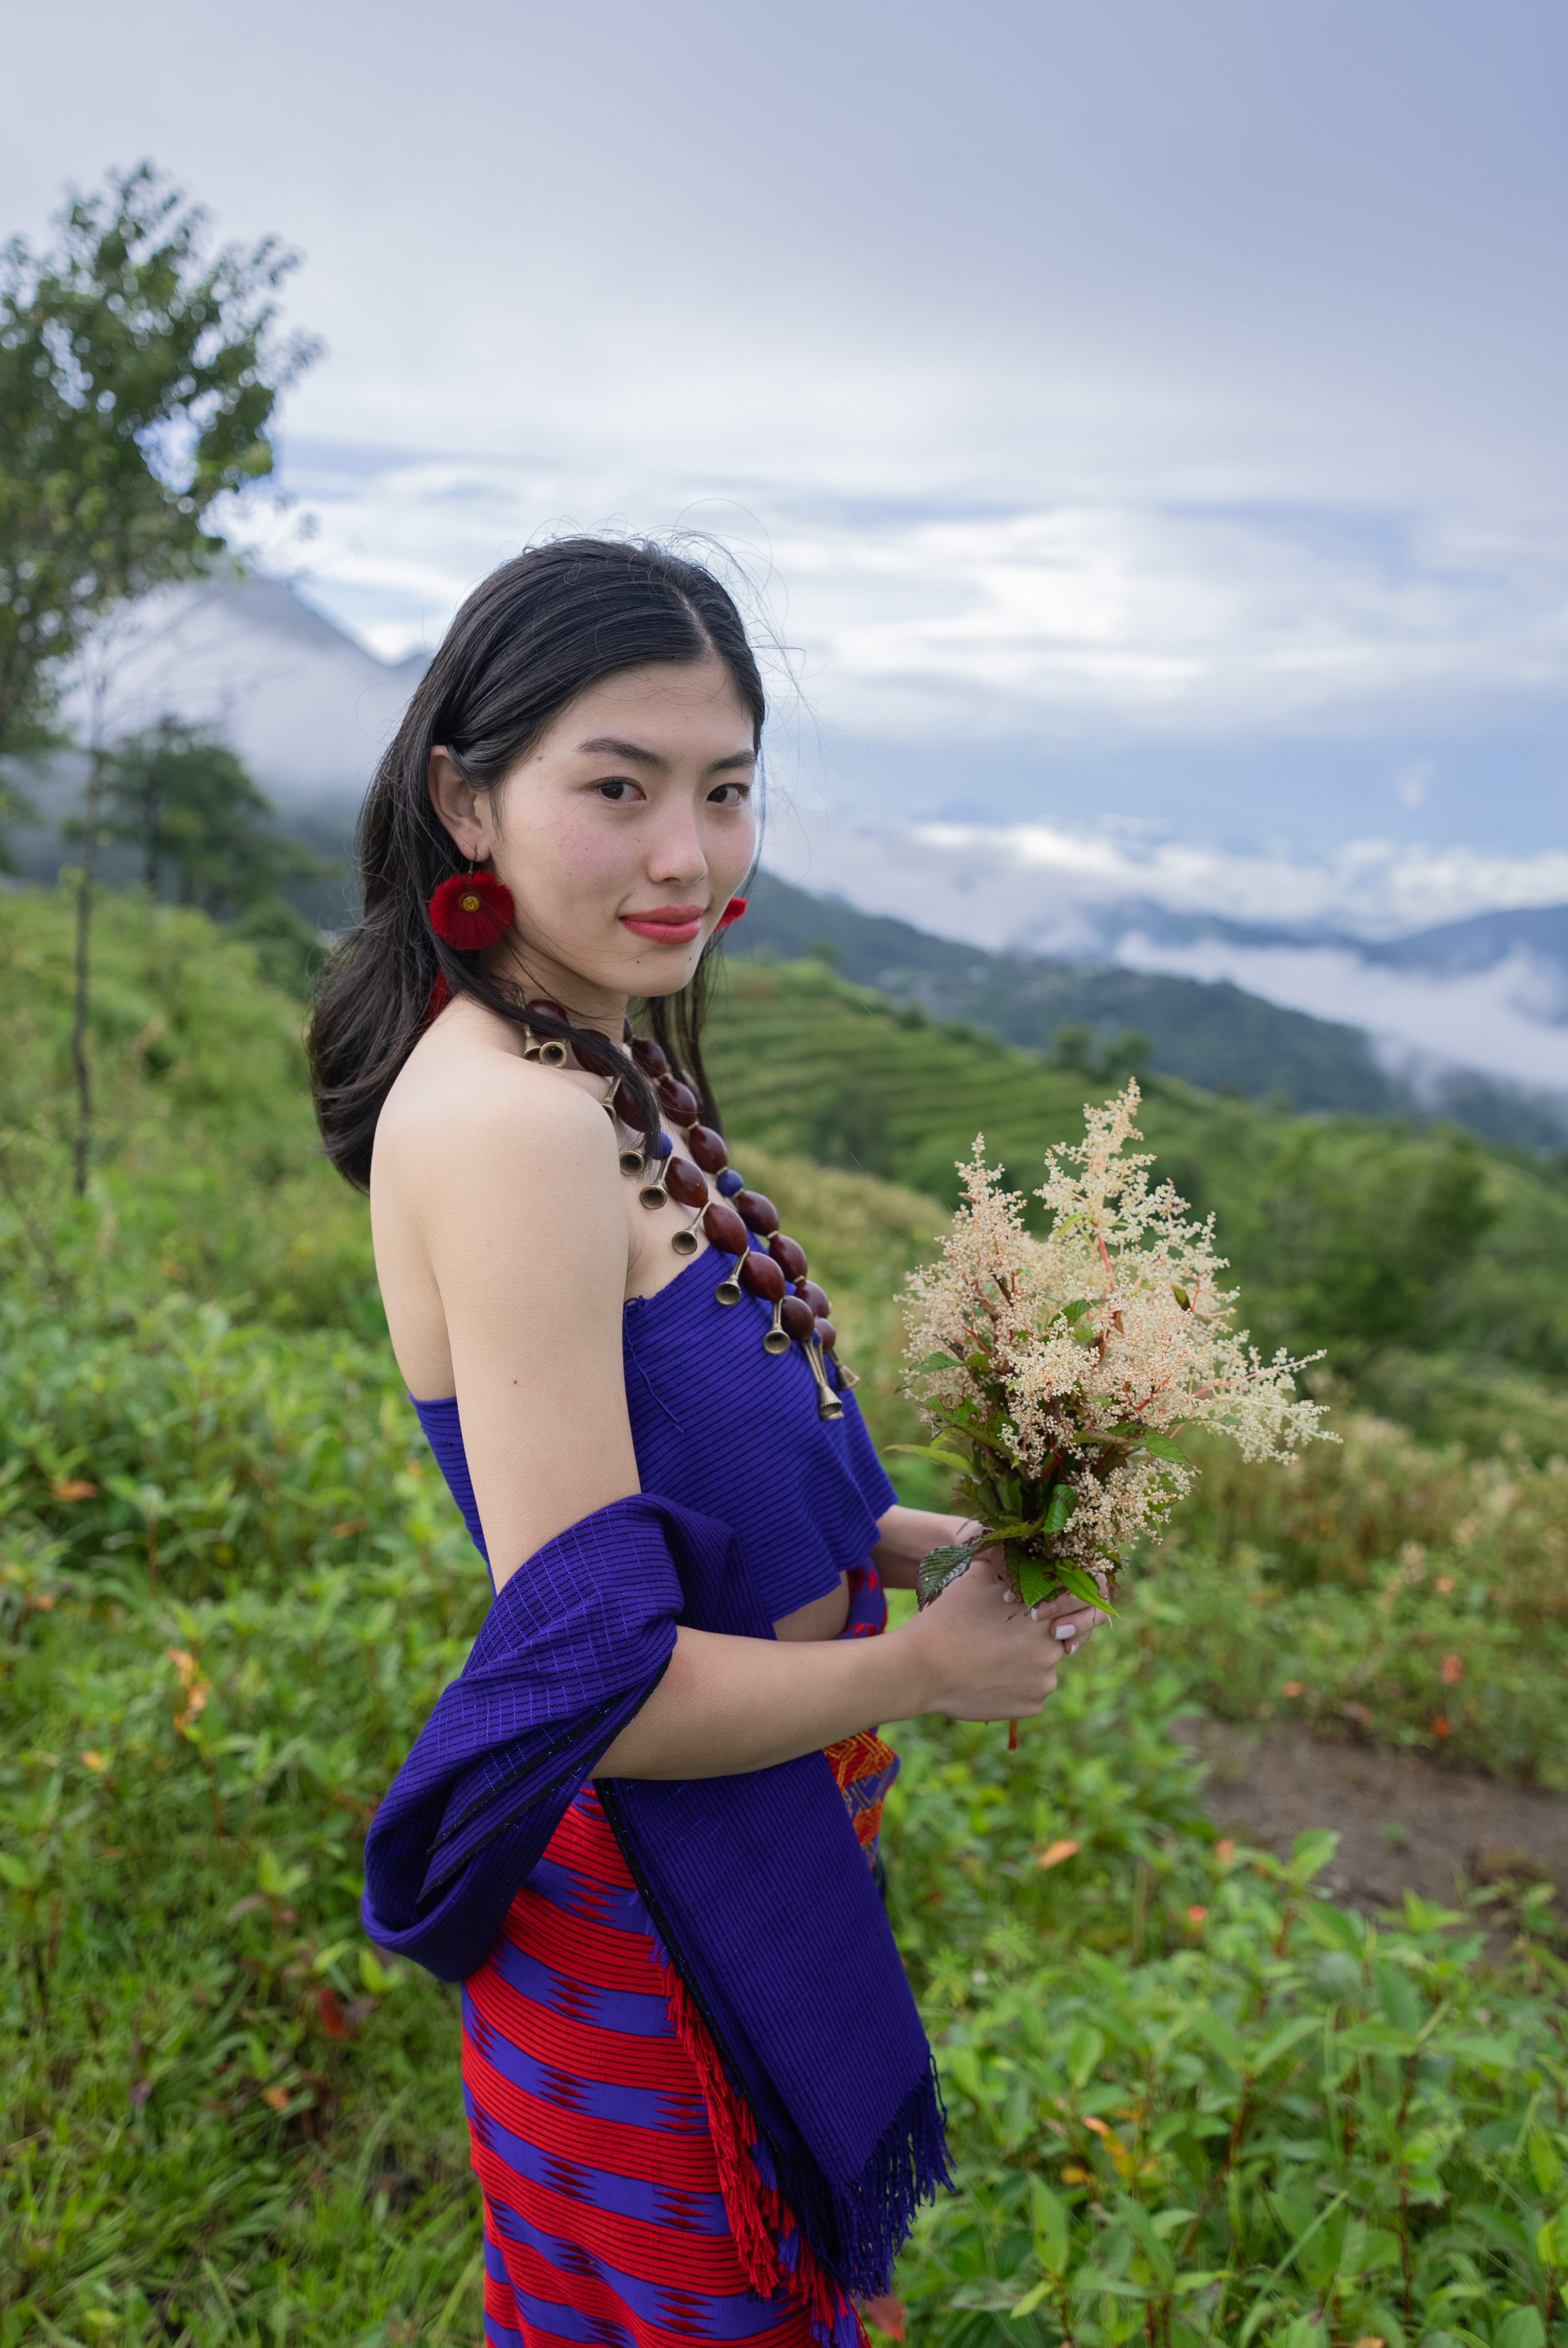 Naga girl in a red traditional attire #nagaland_girls  #nagaland_street_styles #nagaland_street… | India traditional dress, Traditional  dresses designs, East fashion